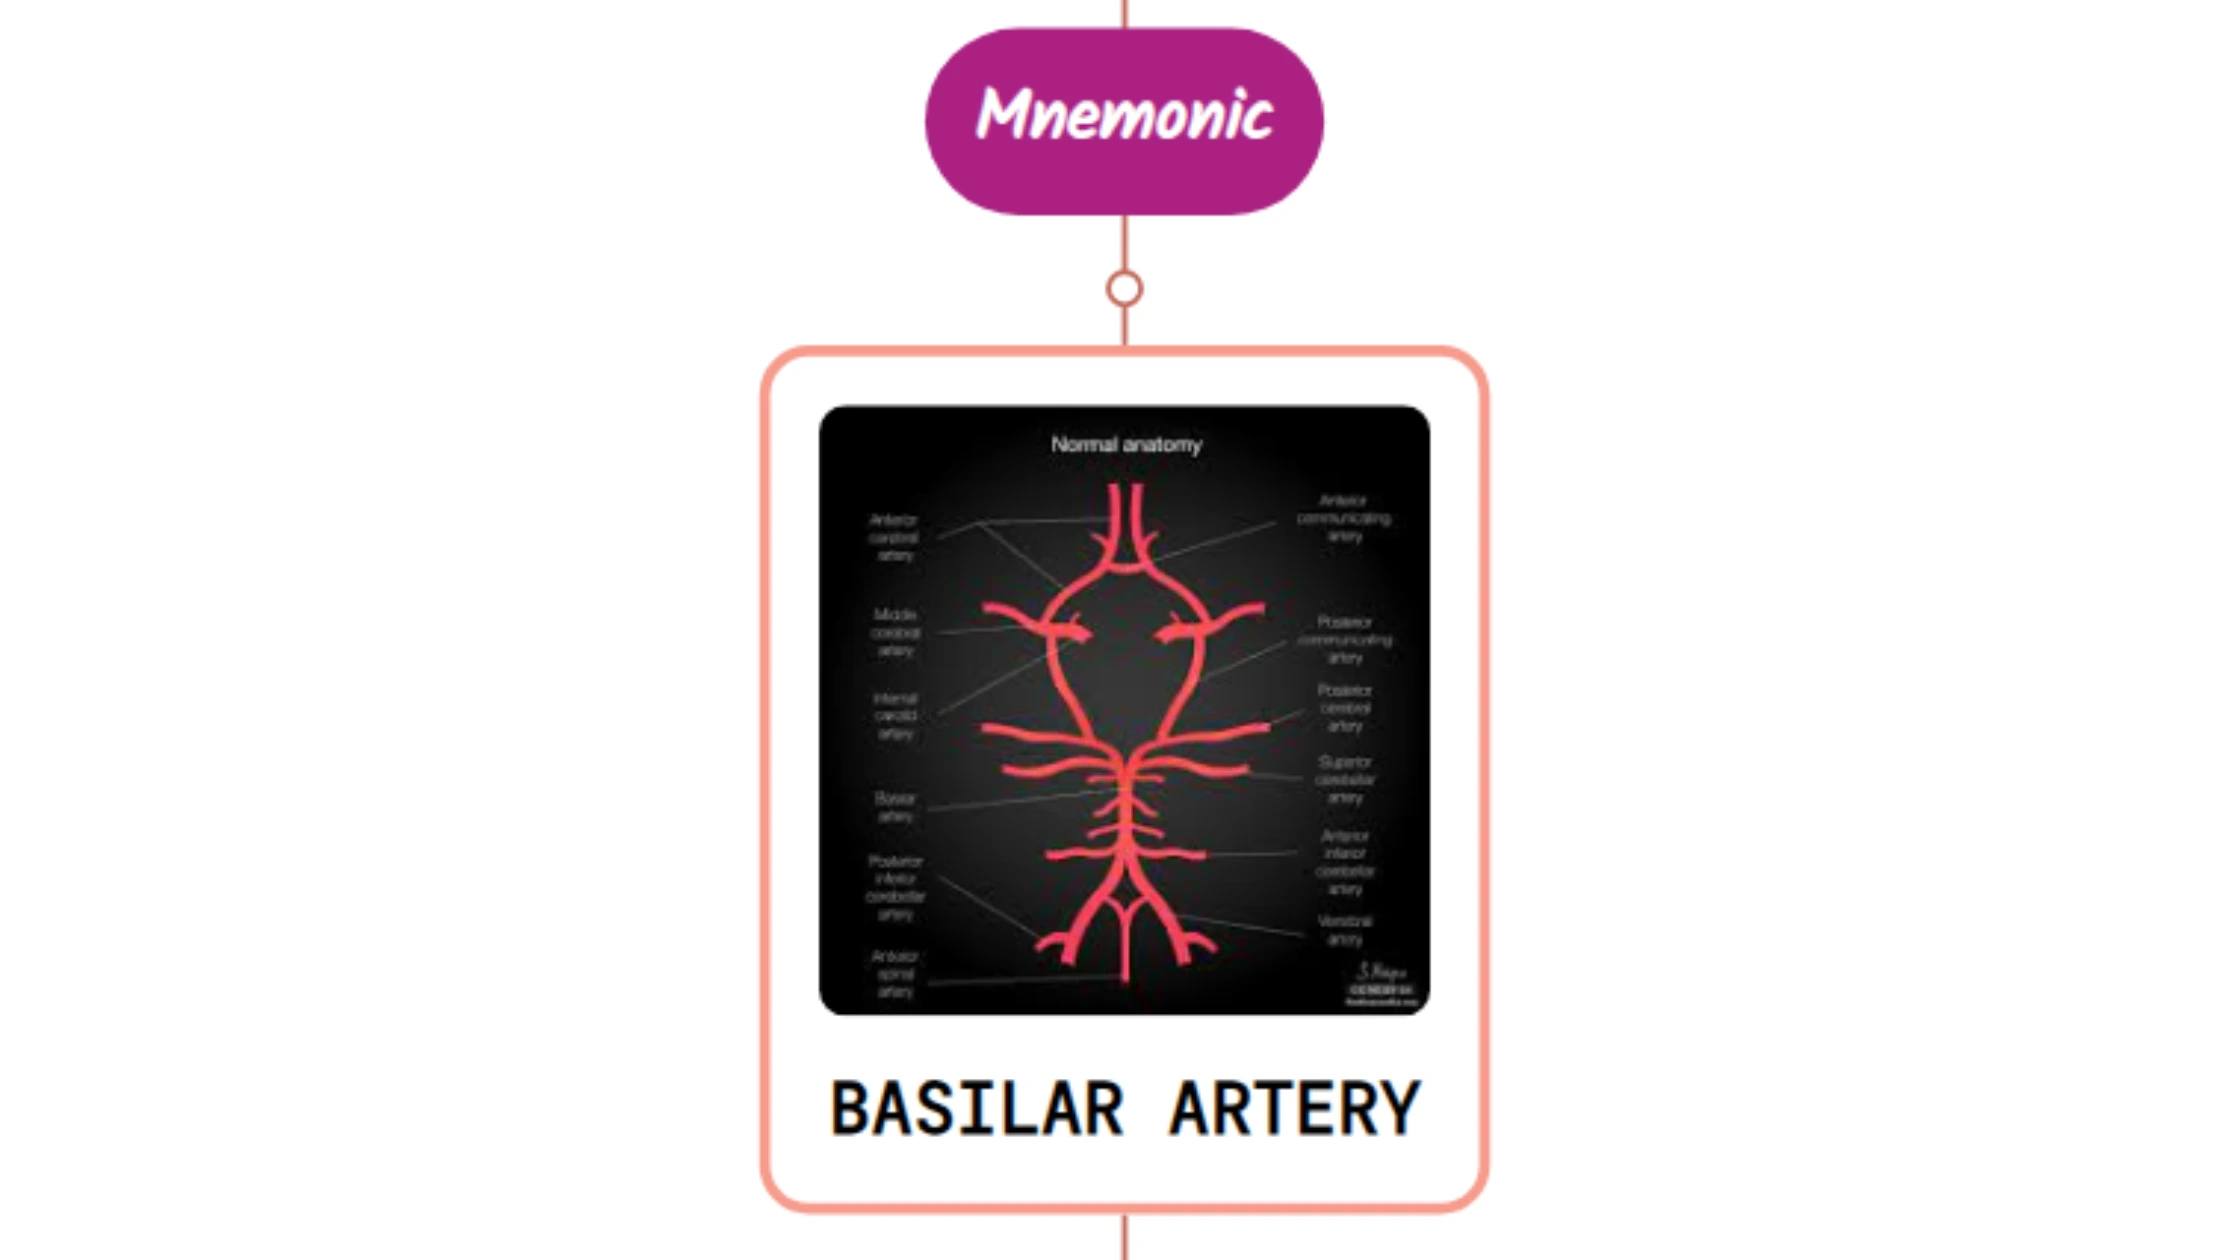 You are currently viewing Basilar Artery – Mnemonic